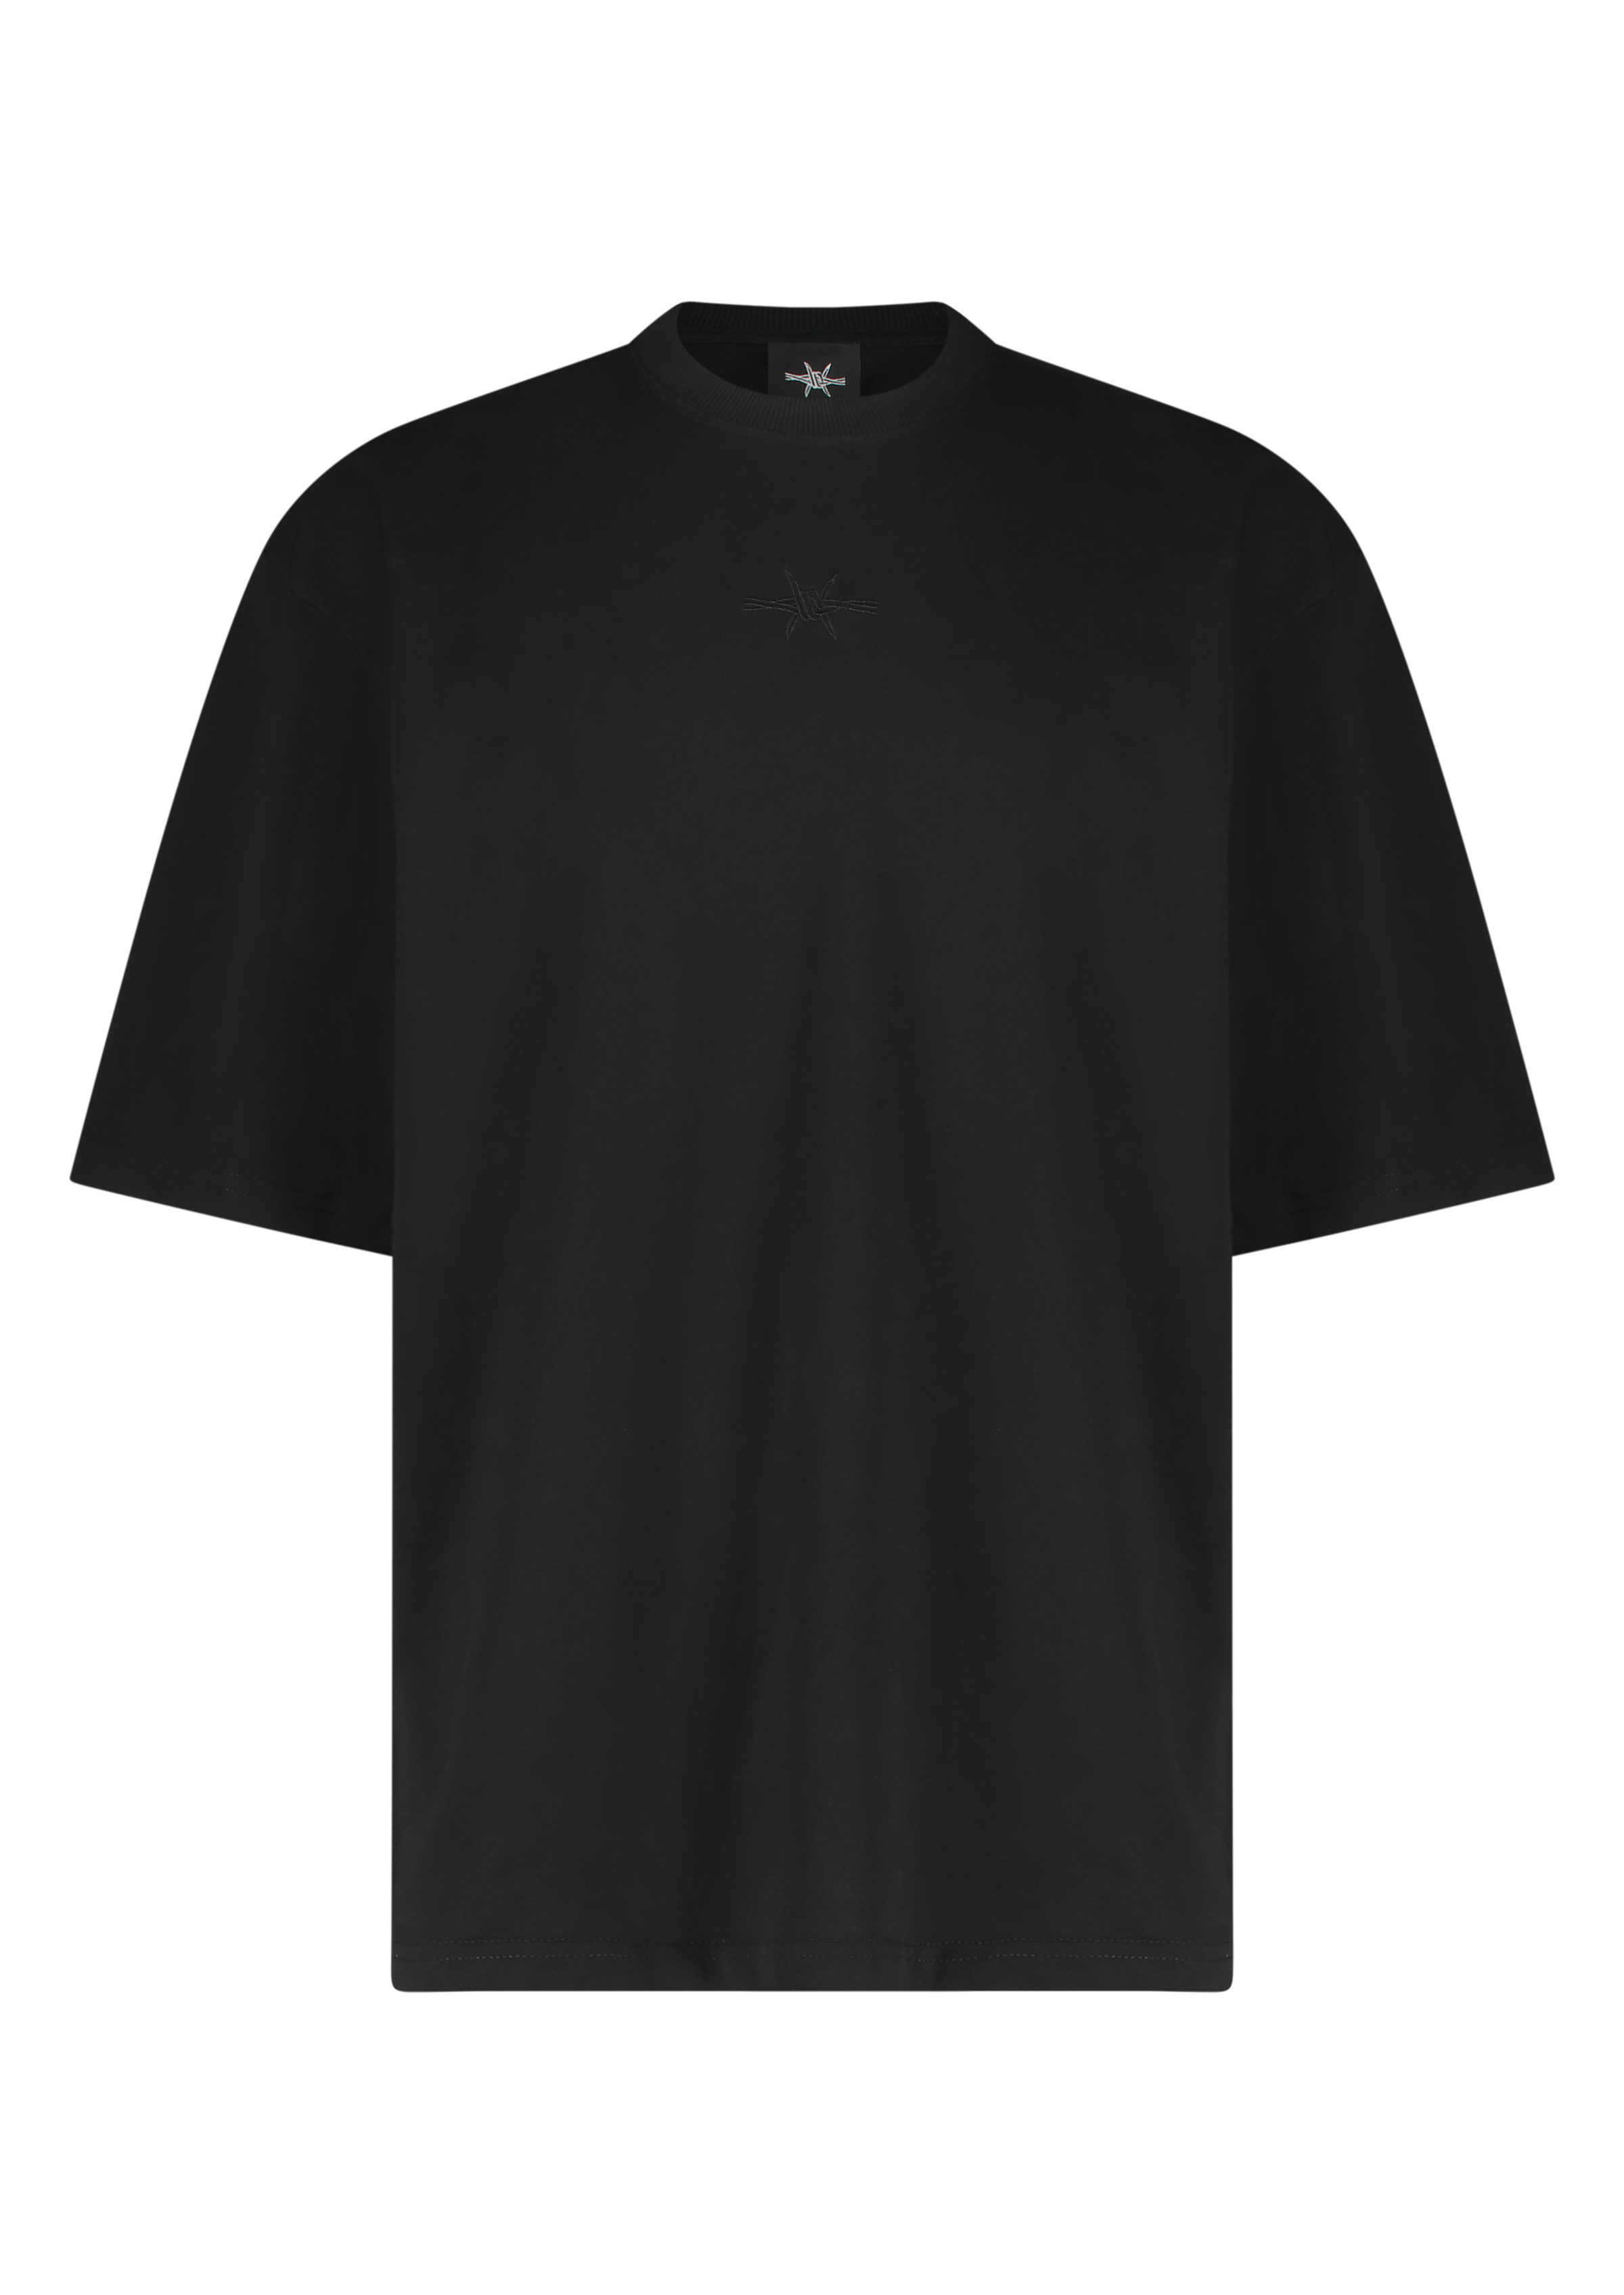 roughmaterial1_paradiso_black_FRONT.png